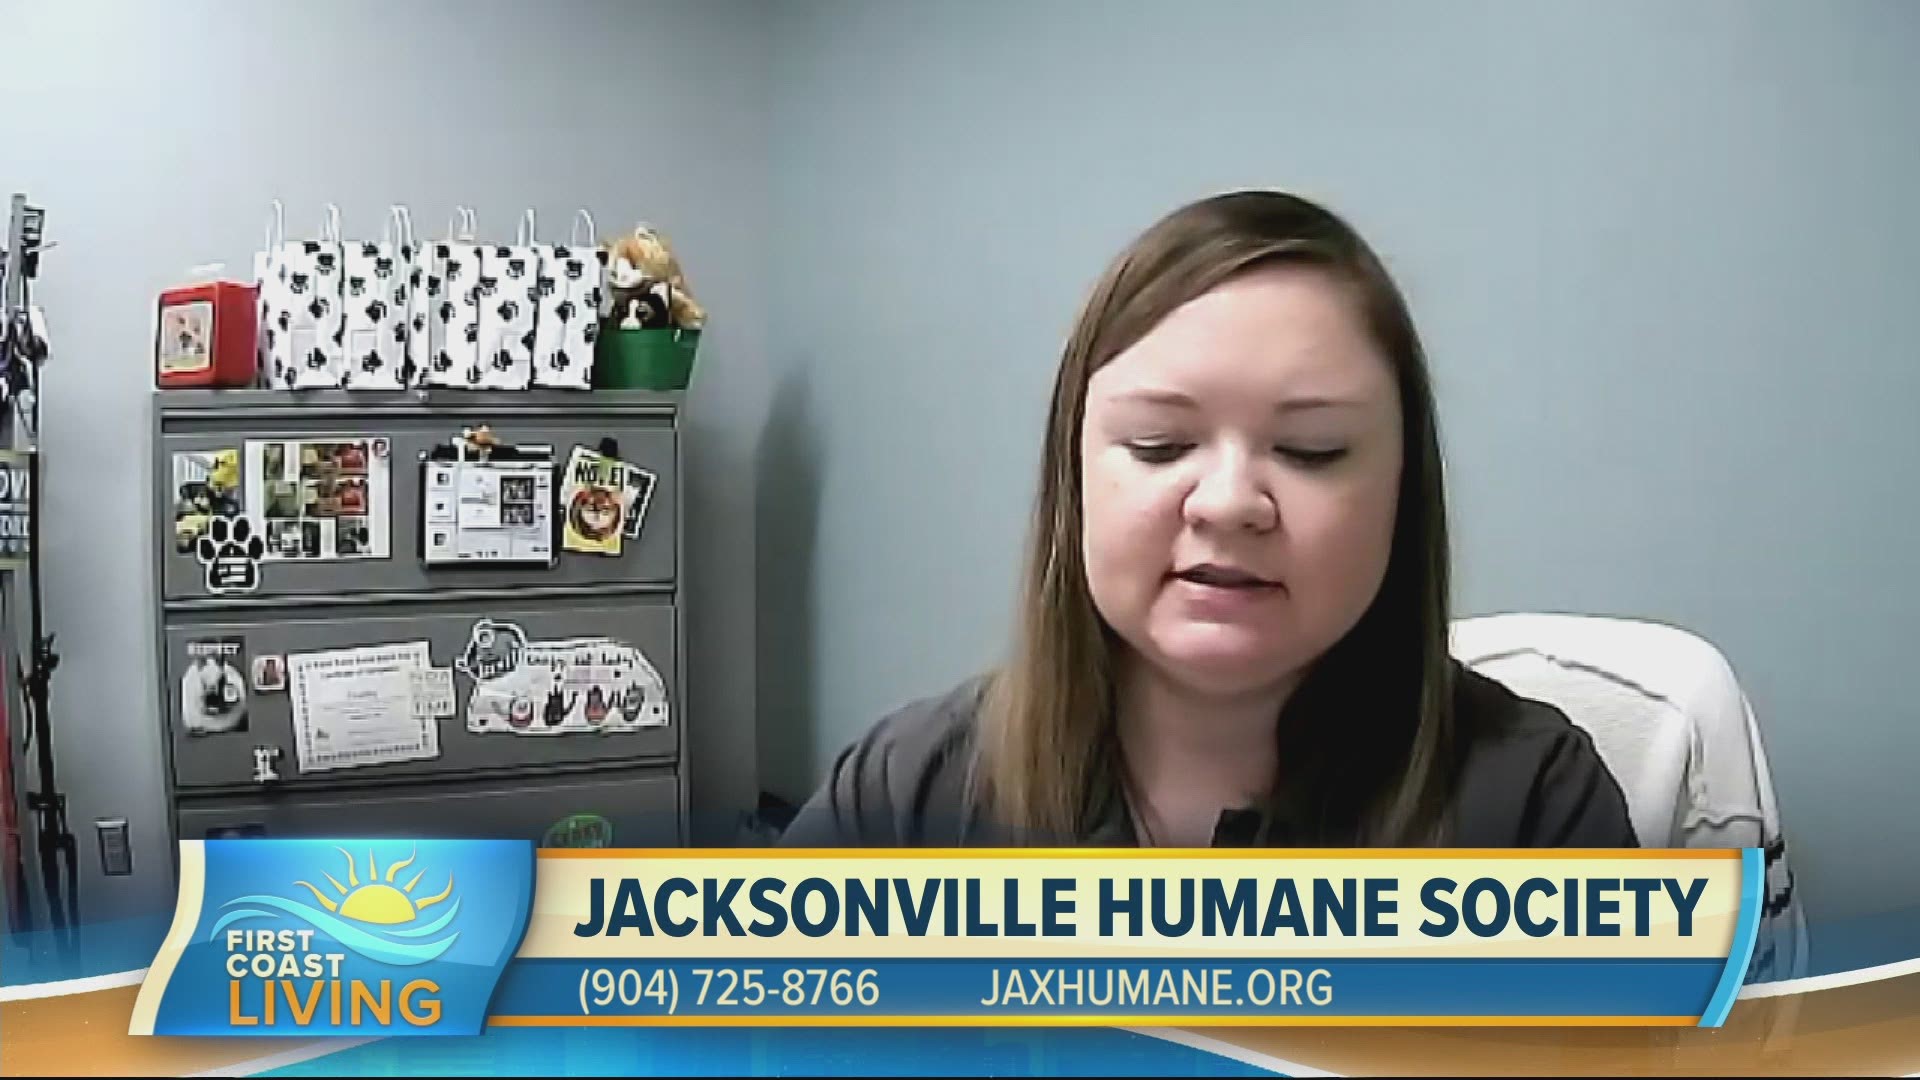 The Jacksonville Humane Society needs your help! Learn how you can join for Feral Cat Awareness day.